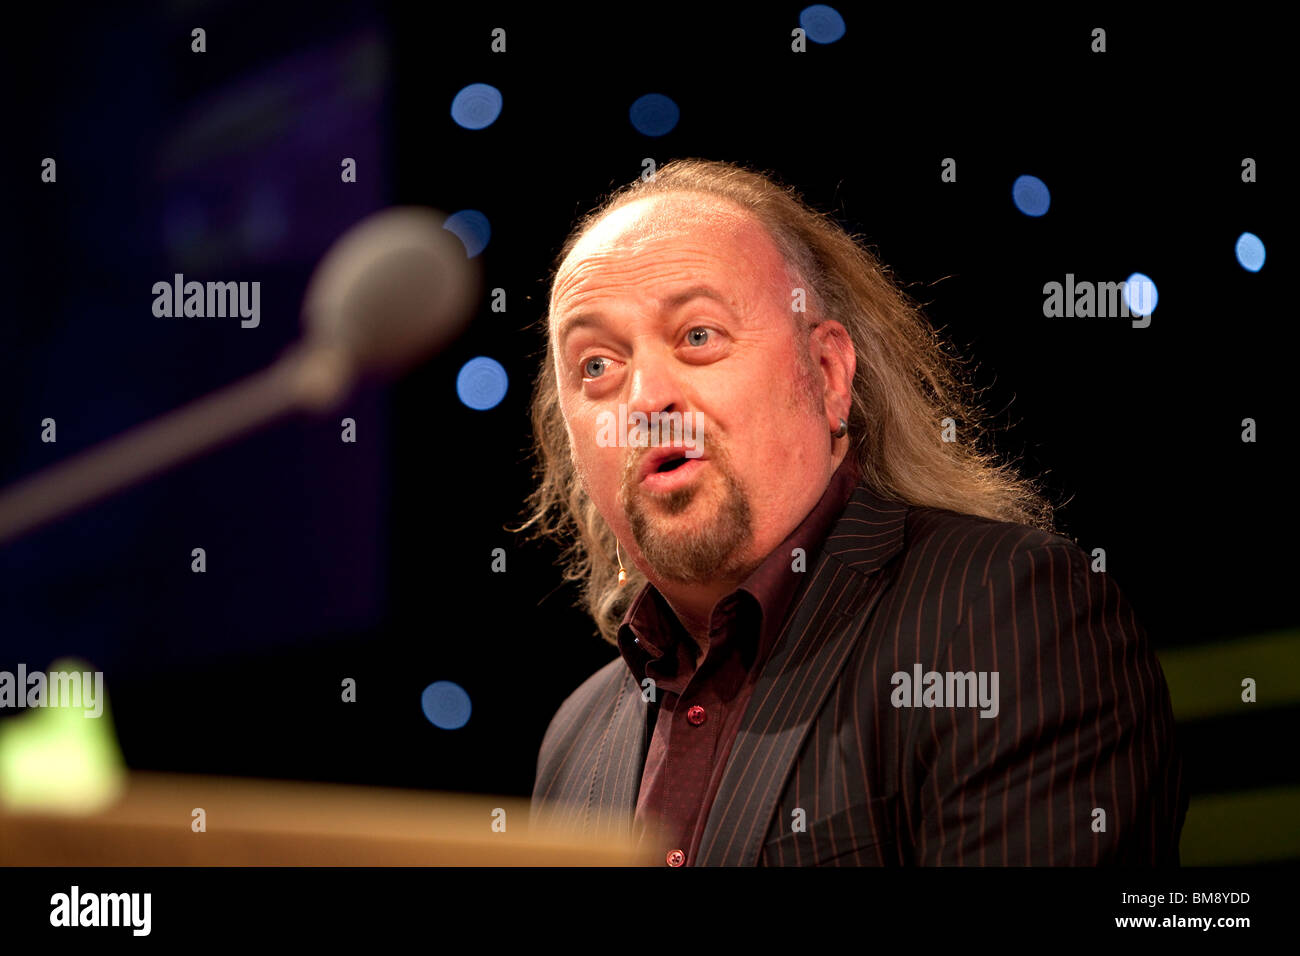 comedian bill bailey presenting at awards ceremony Stock Photo